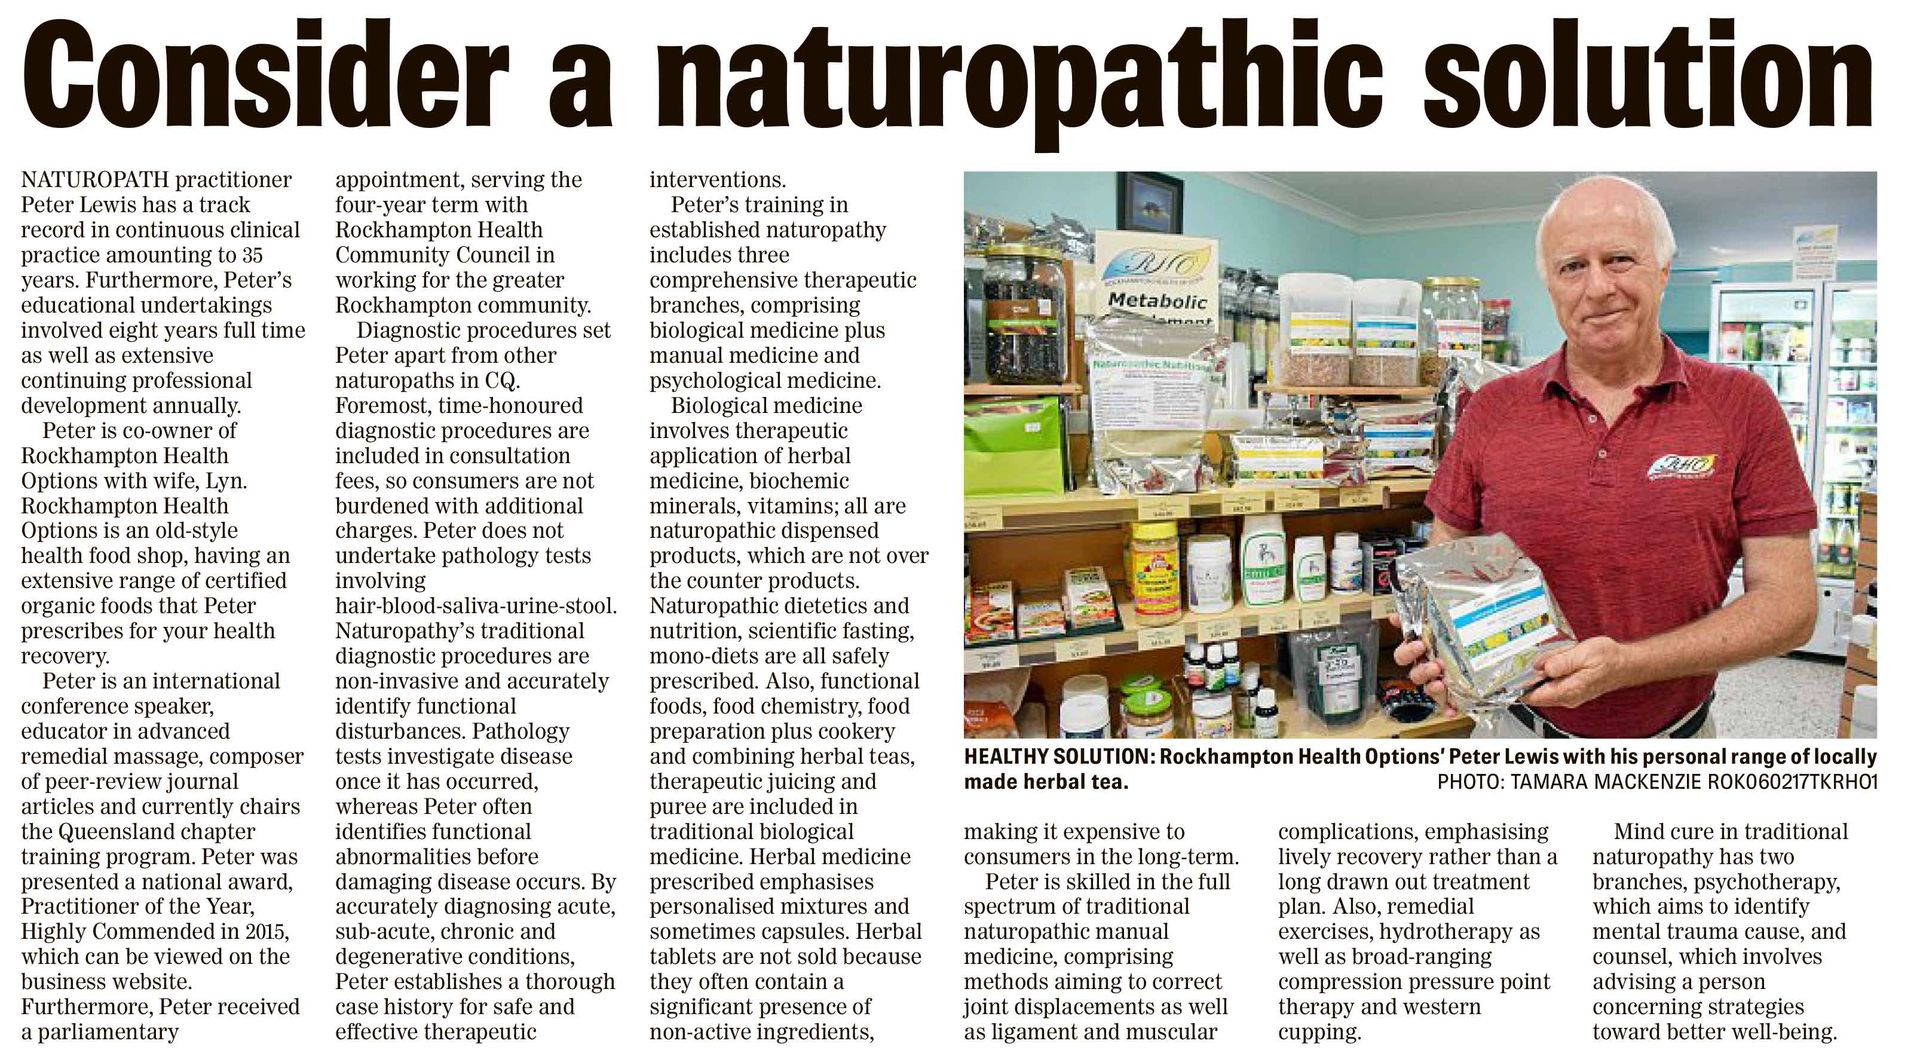 article on naturopathic solution